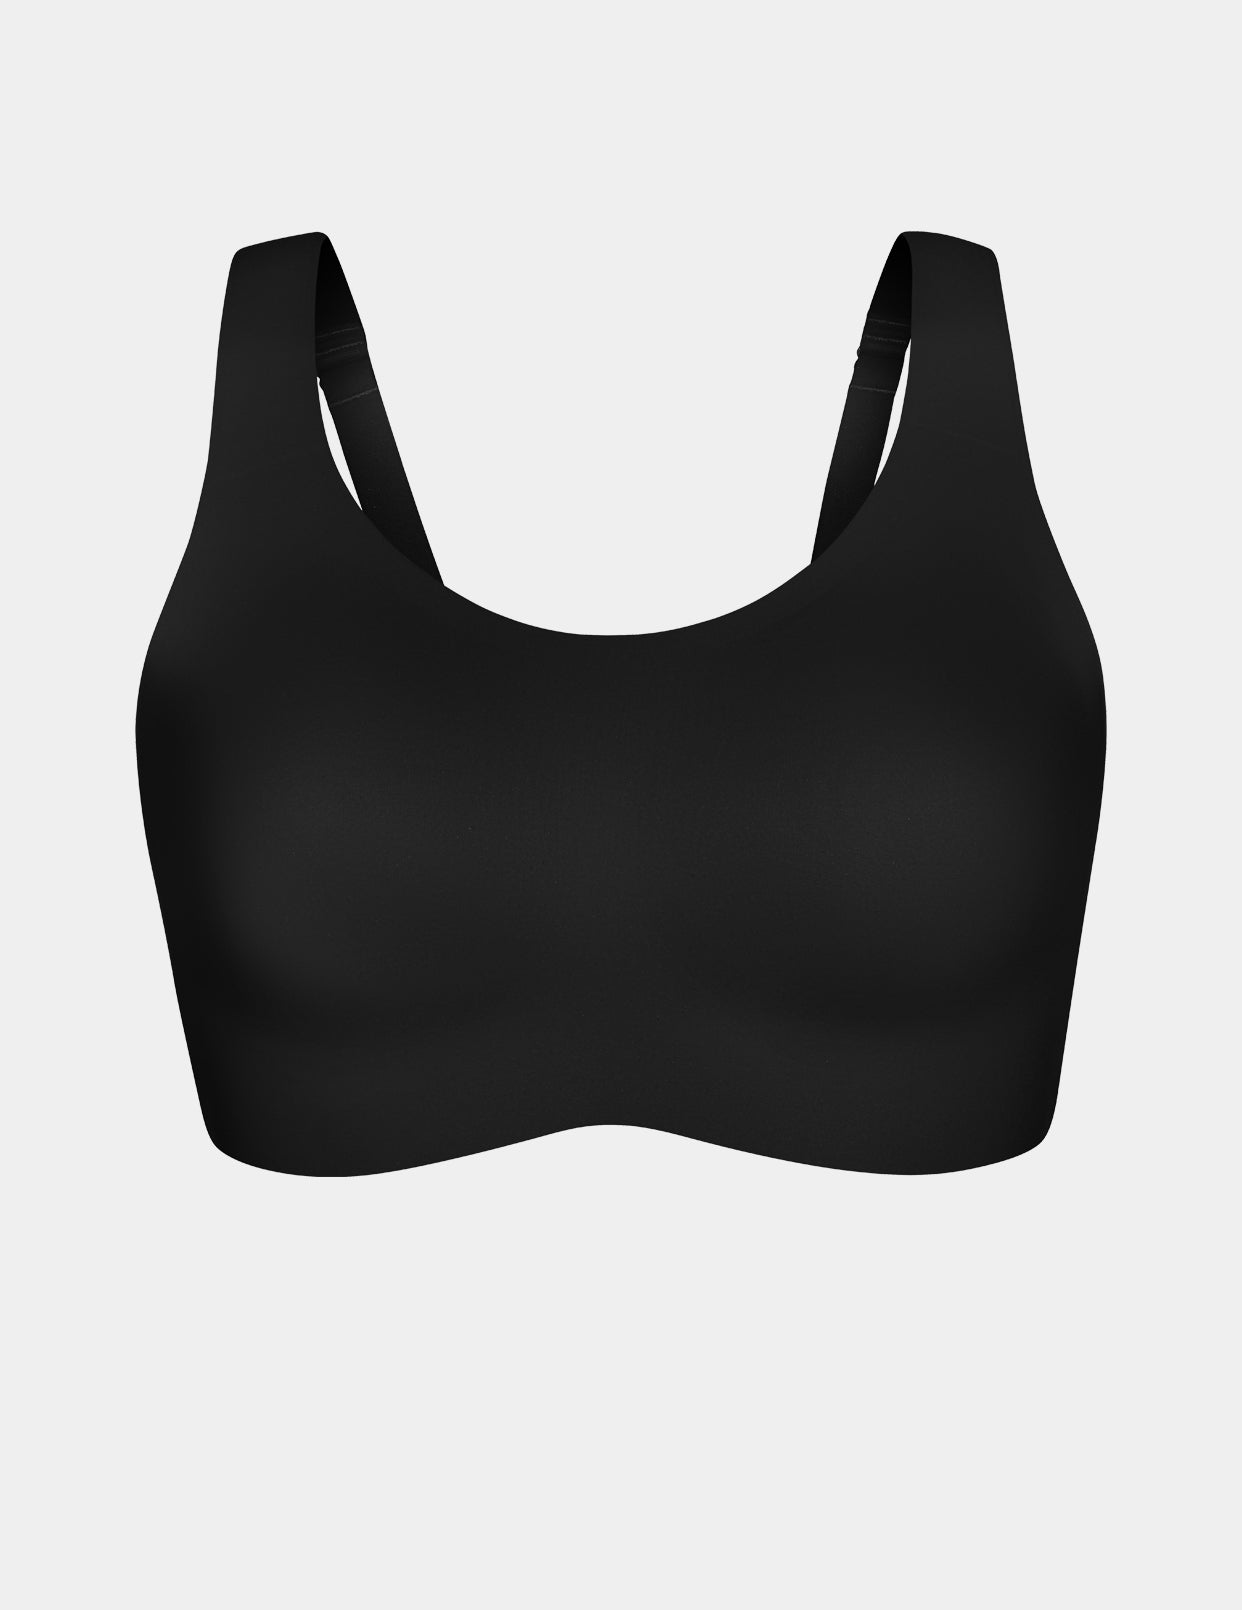 Knix - The V-Neck Evolution Bra is here! U.S. and International Customers  shop here:  /products/v-neck-evolution-bra Canadian Customers shop here: https:// knixwear.ca/products/v-neck-evolution-bra